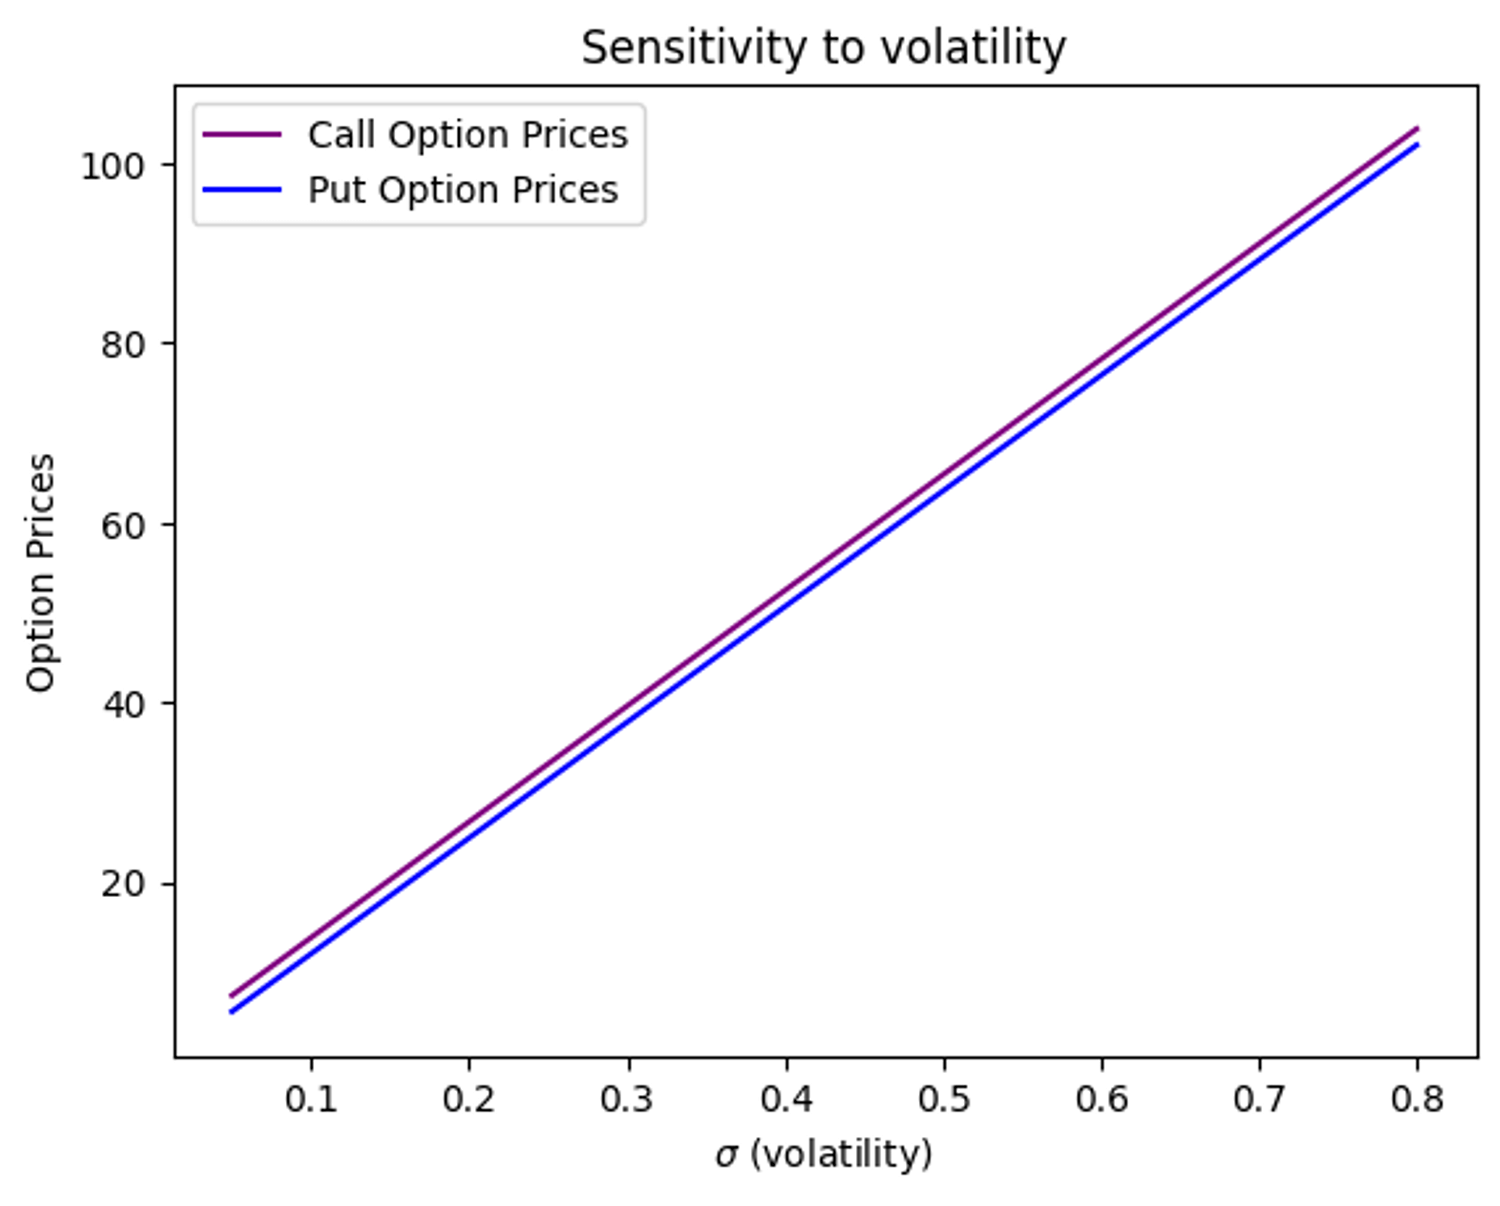 As volatility of the underlying security increases, both call & put options tend to rise because, higher volatility increases liquidity and possibility of options finishing in-the-money, thus making them more valuable.